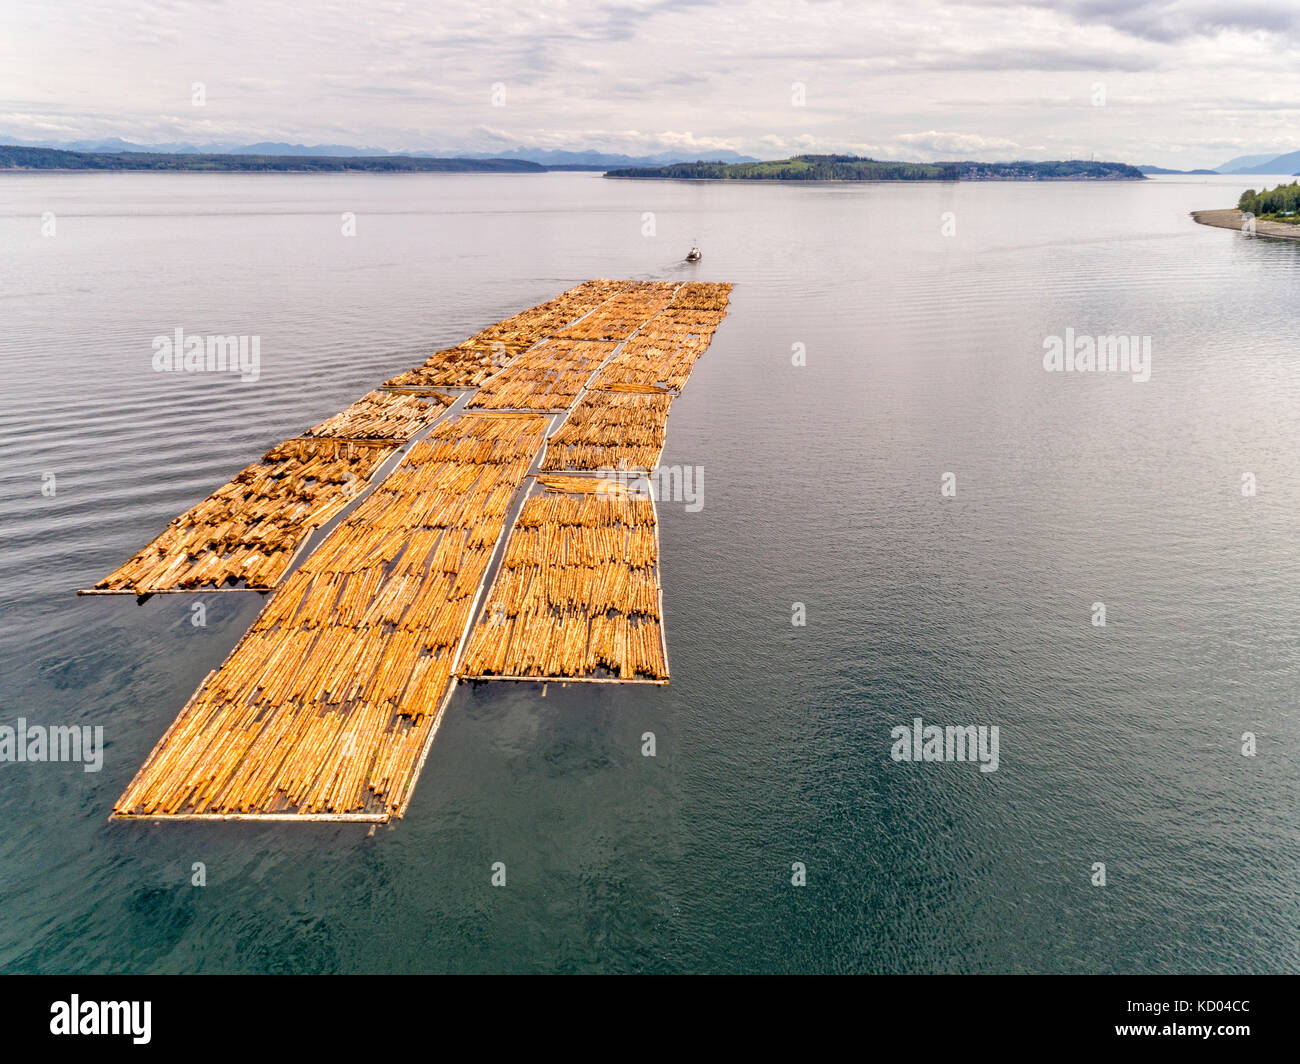 Tug towing a large float of logs off Northern Vancouver Island, looking towards Cormorant Island, Alert Bay and Johnstone Strait, British Columbia, Canada. Stock Photo